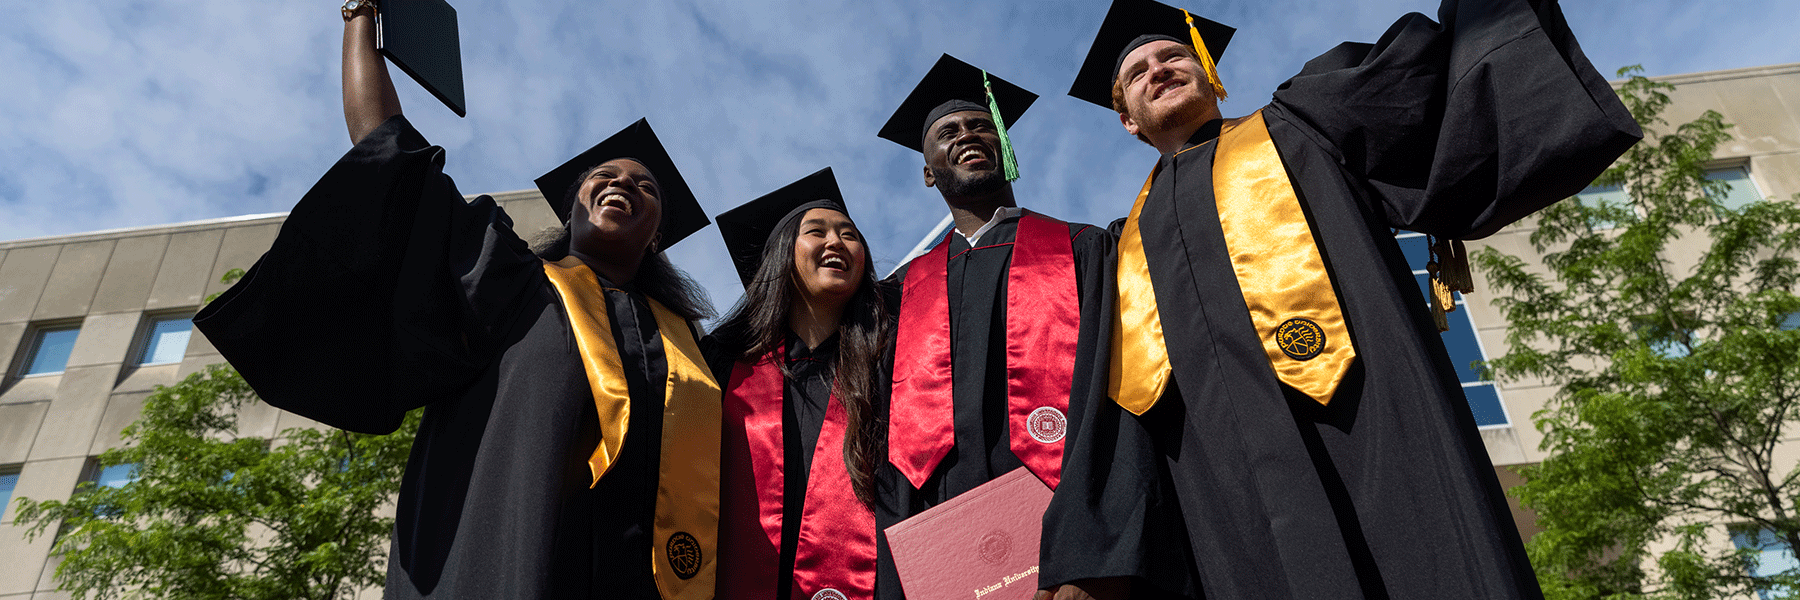 A group of graduates smile and pose in their commencement attire.